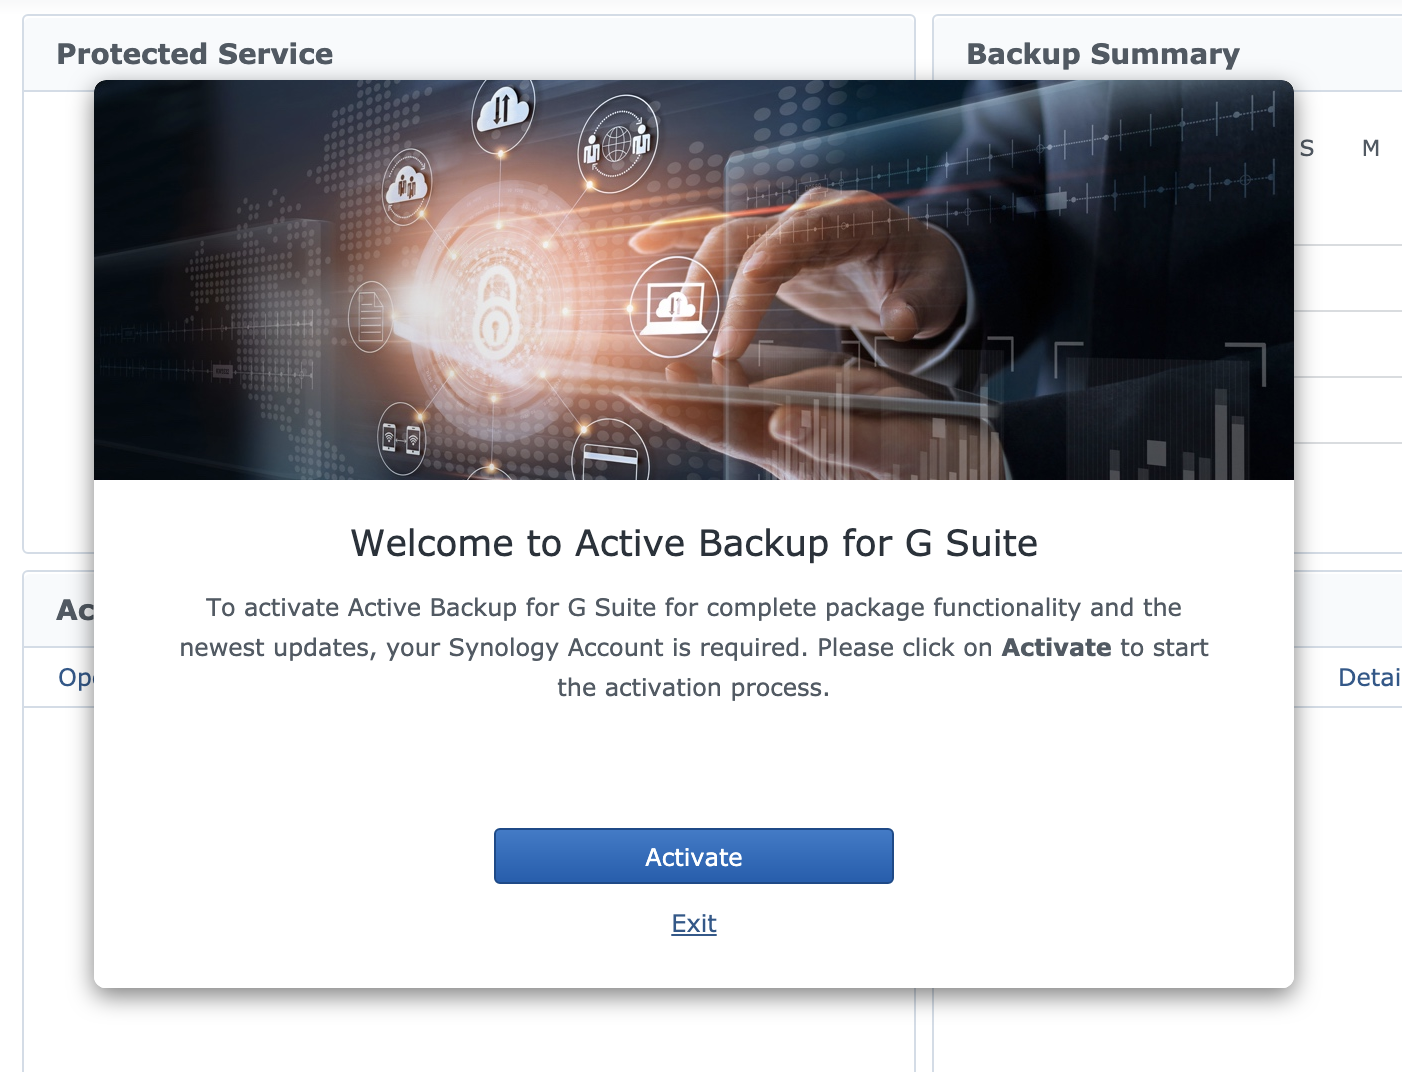 How to Purchase and Activate the Kernel G Suite Backup Tool?